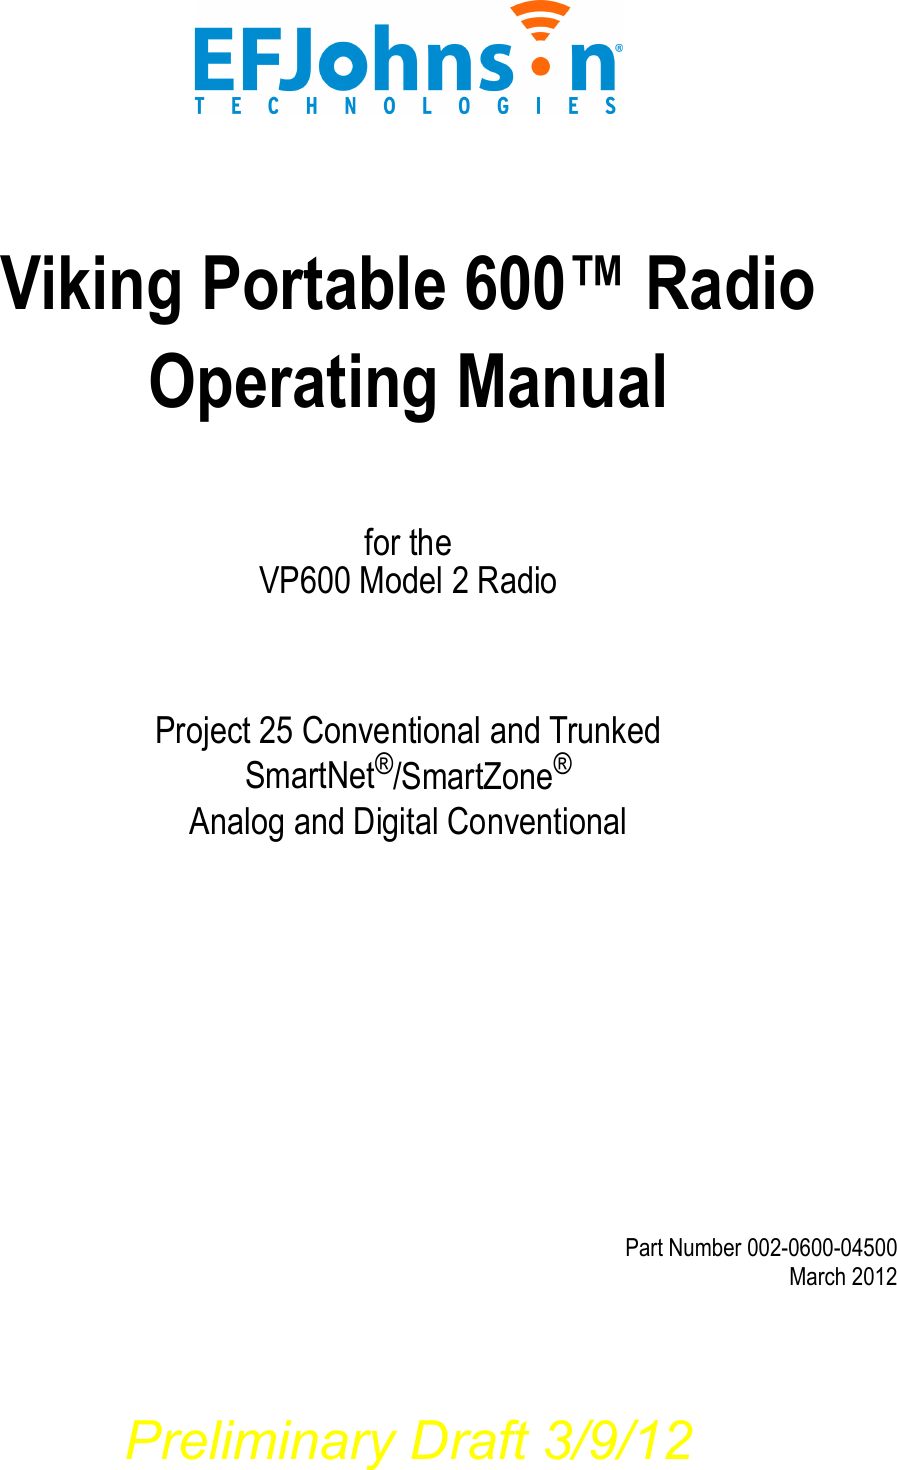 Viking Portable 600™ Radio Operating Manualfor theVP600 Model 2 RadioProject 25 Conventional and TrunkedSmartNet®/SmartZone®Analog and Digital ConventionalPart Number 002-0600-04500 March 2012Preliminary Draft 3/9/12